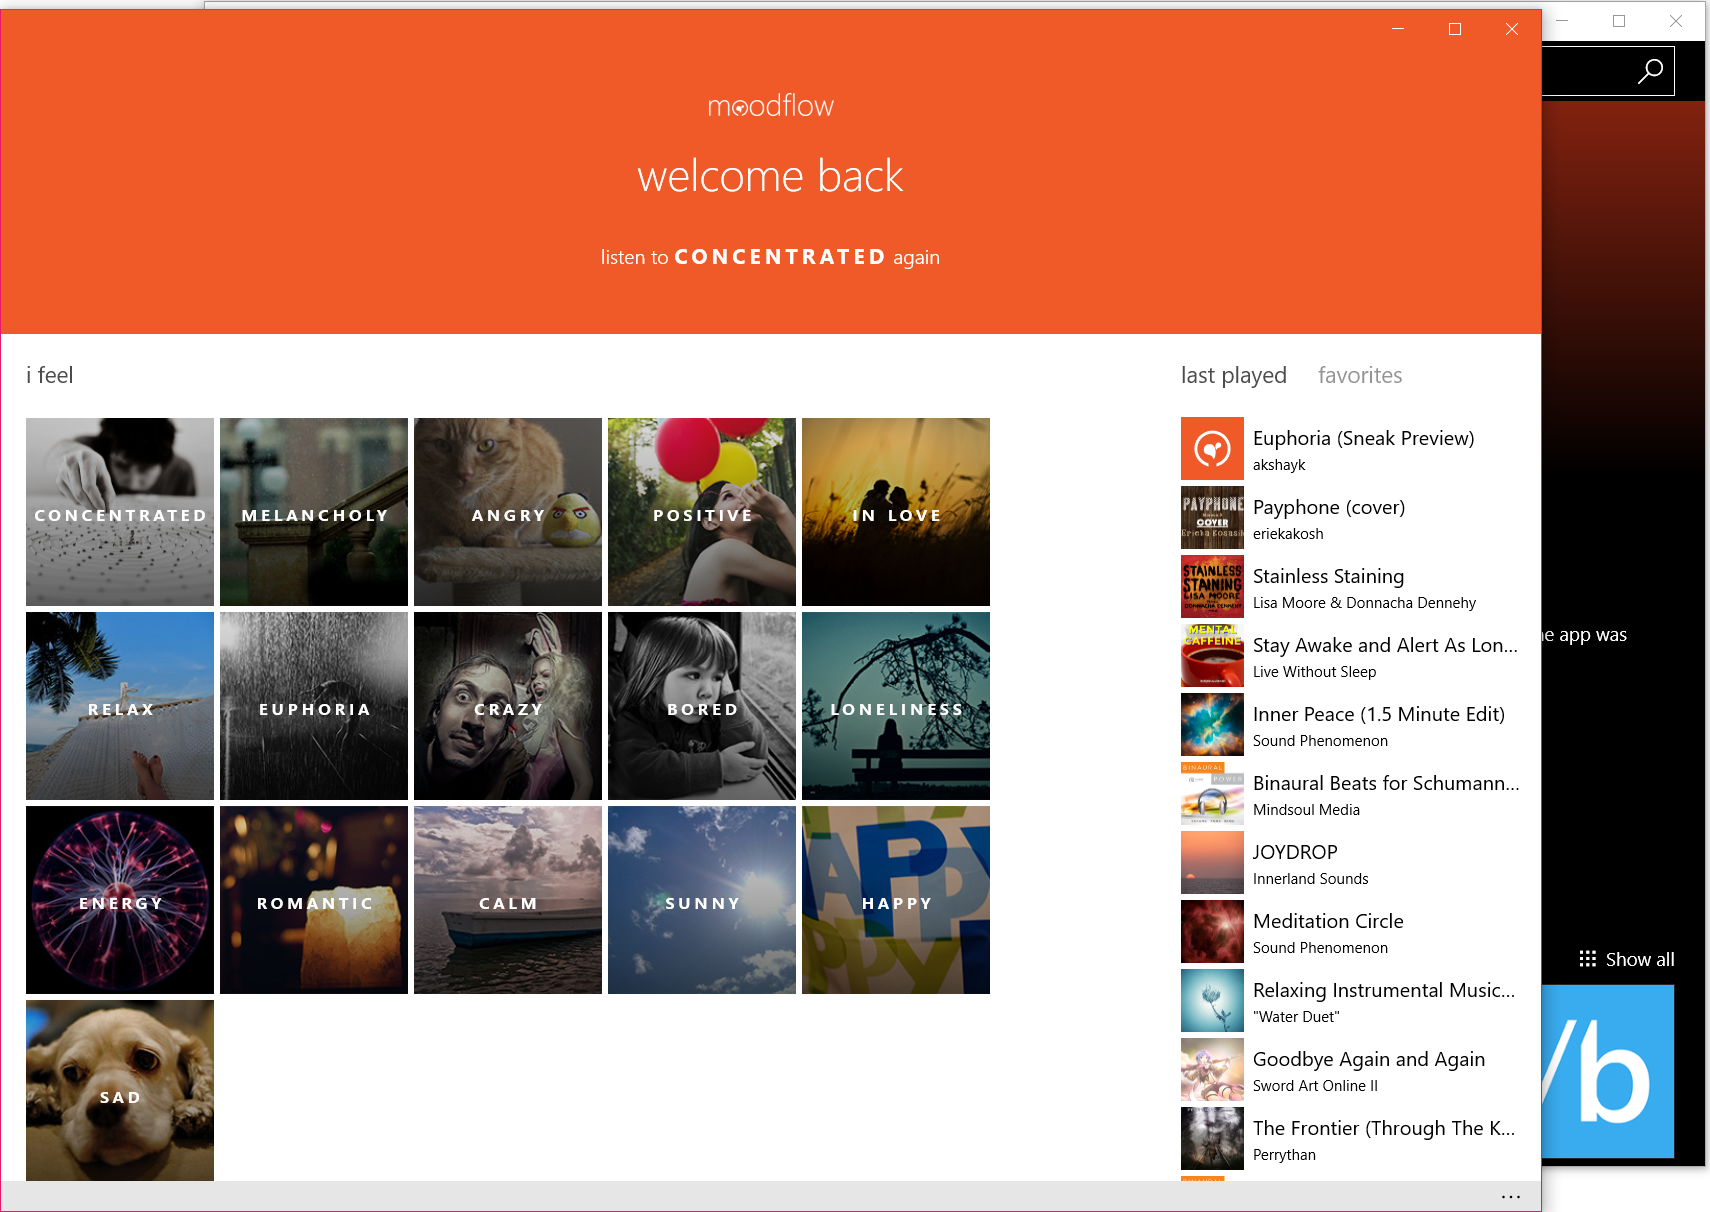 Moodflow is a lightweight app that plays music tailored for your mood